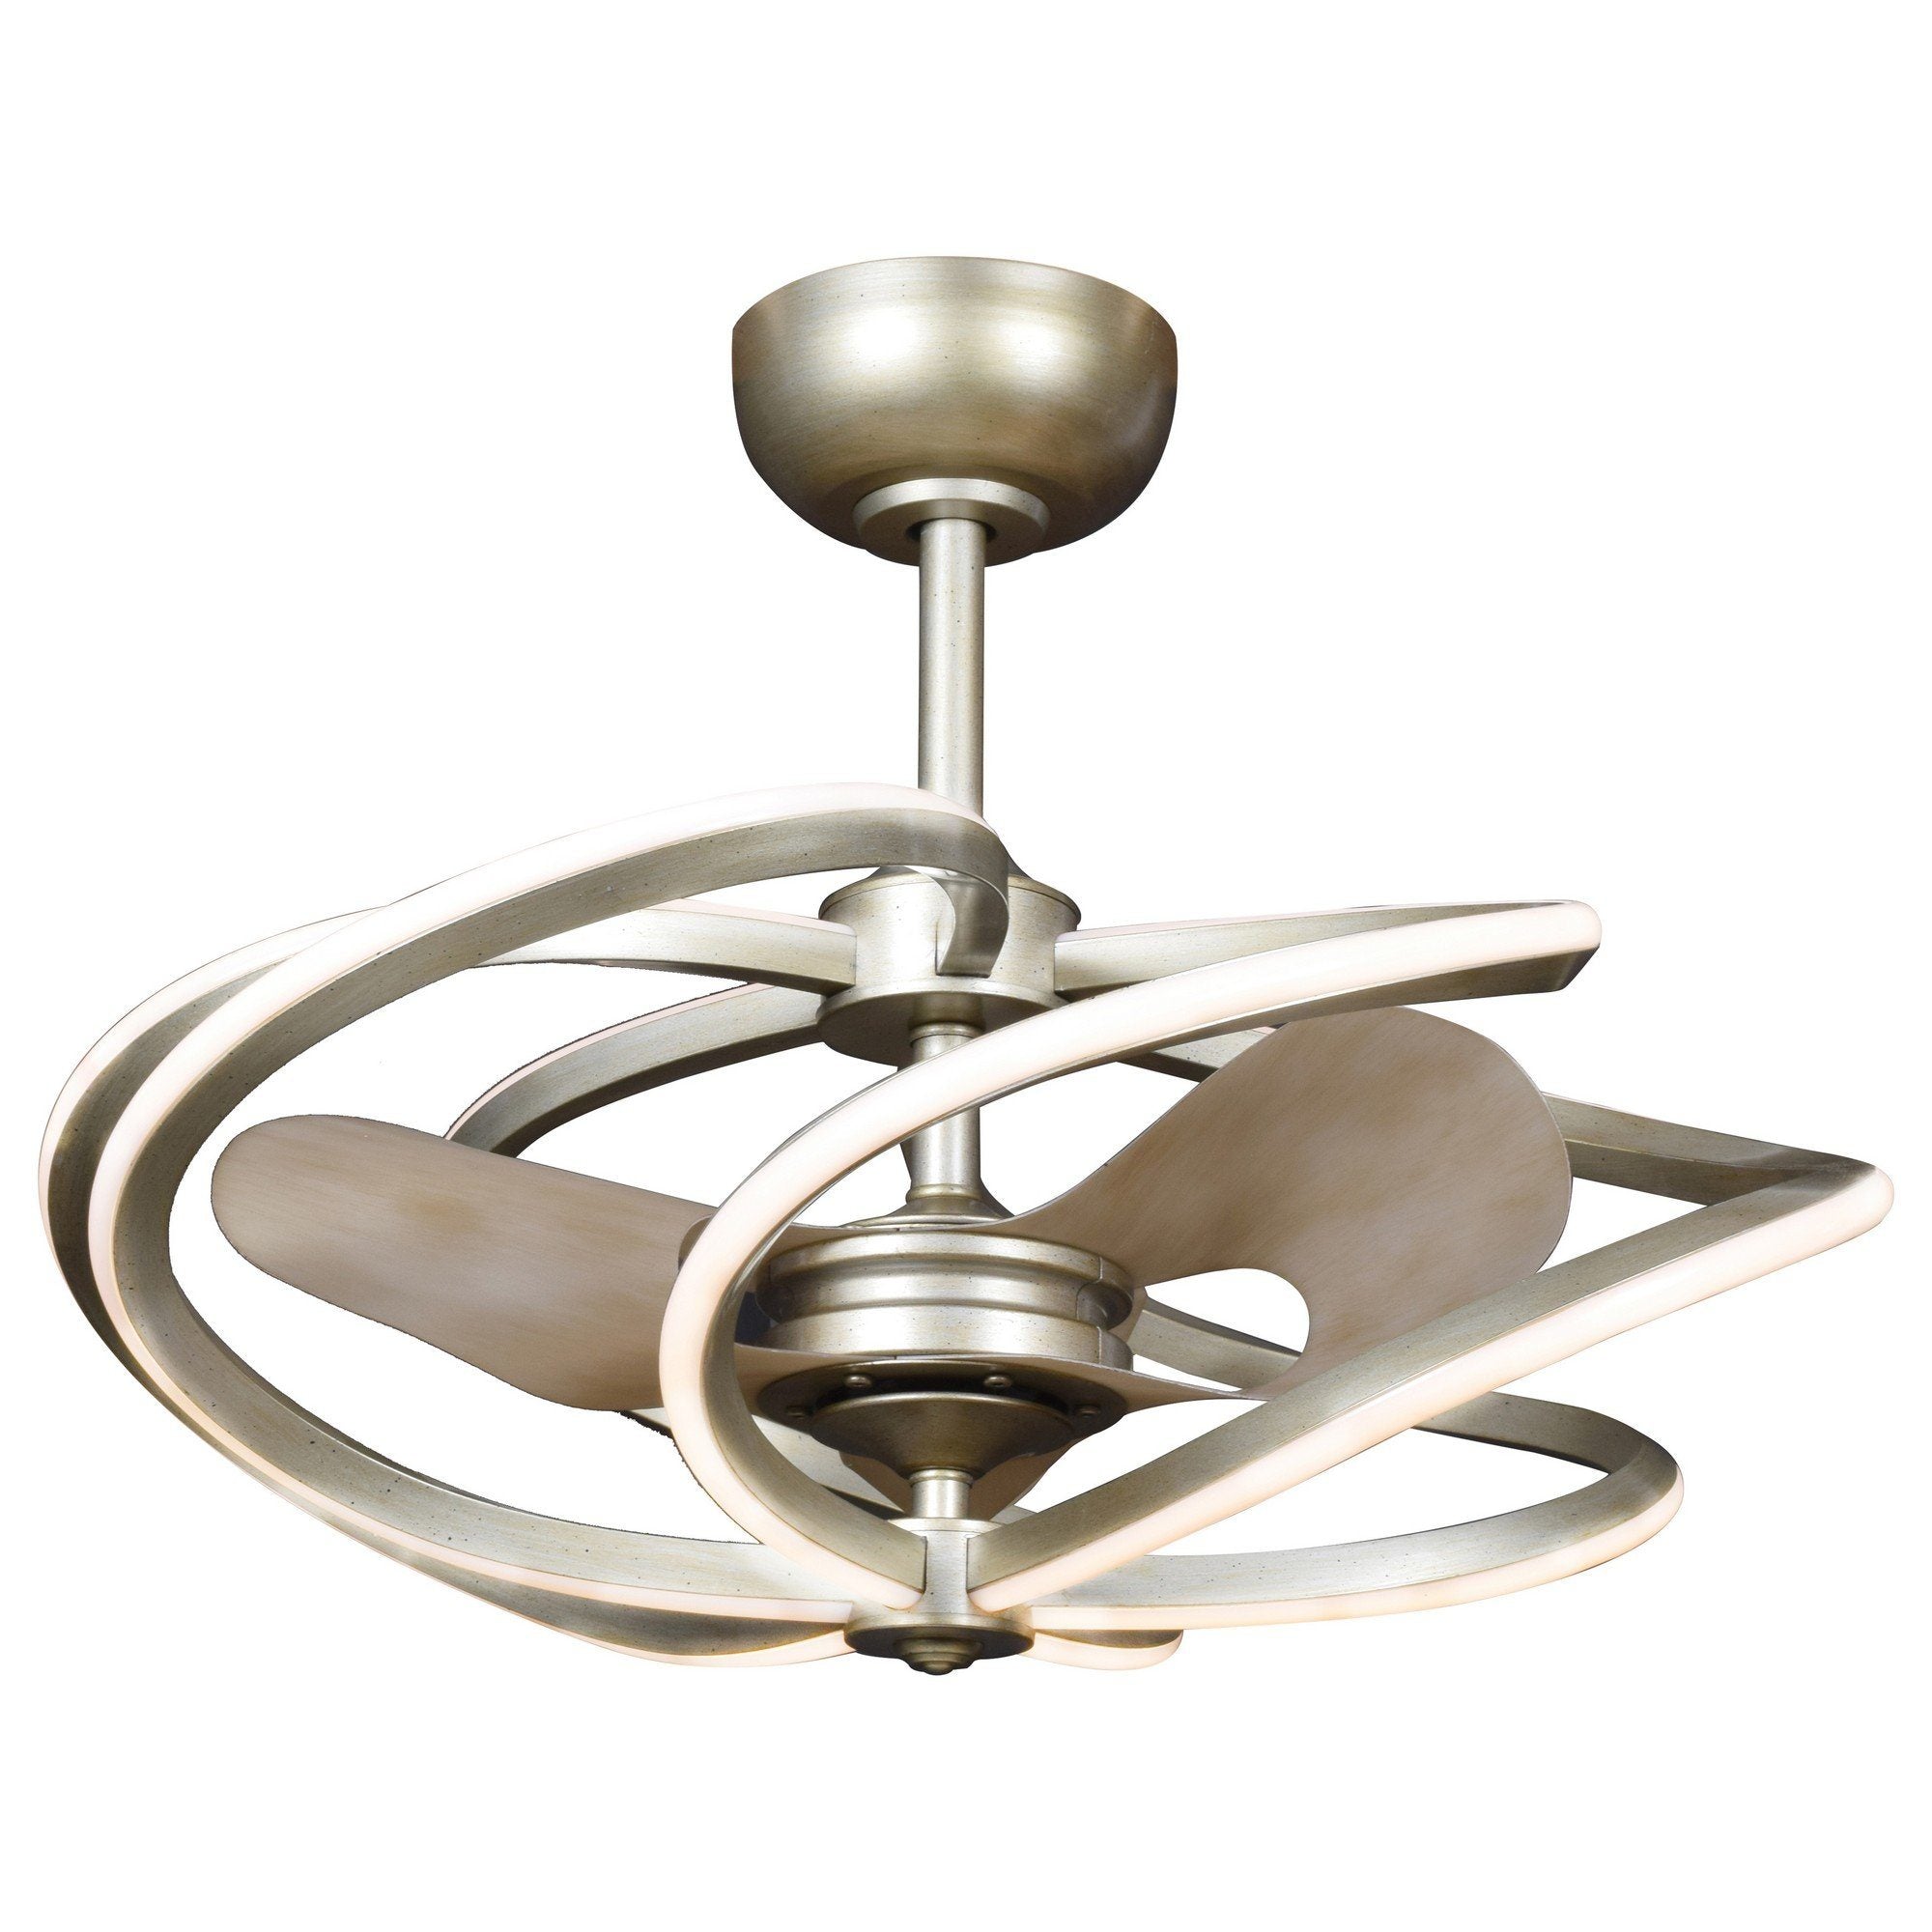 Vortex (m) 6-Light LED Pendant with Fan - Brushed Steel Ceiling Access Lighting 